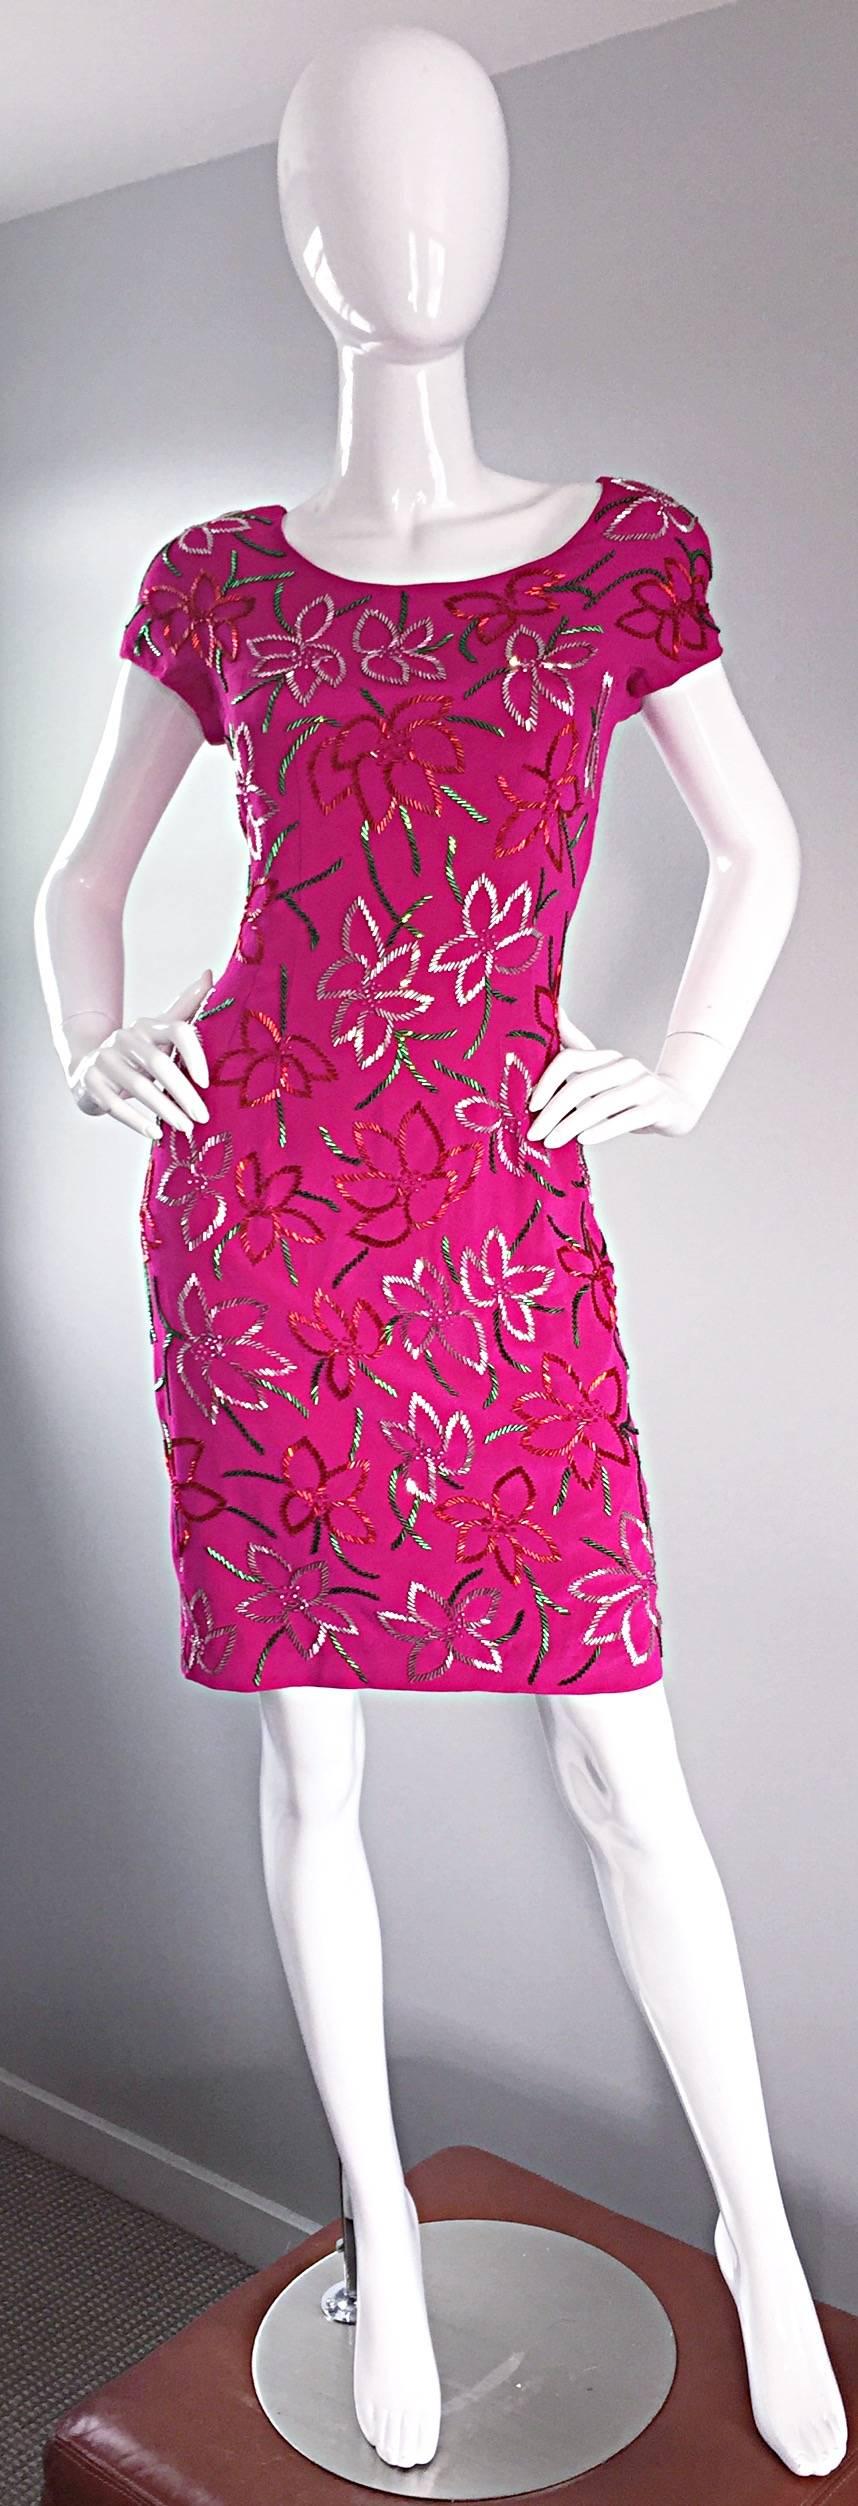 Wonderful in every aspect! Early 1990s CARMEN MARC VALVO hot pink silk dress! Encrusted with thousands of glass beads in red, green, silver, and pink, that form a tropical floral print throughout. Fantastic shape, that flatters the body in a